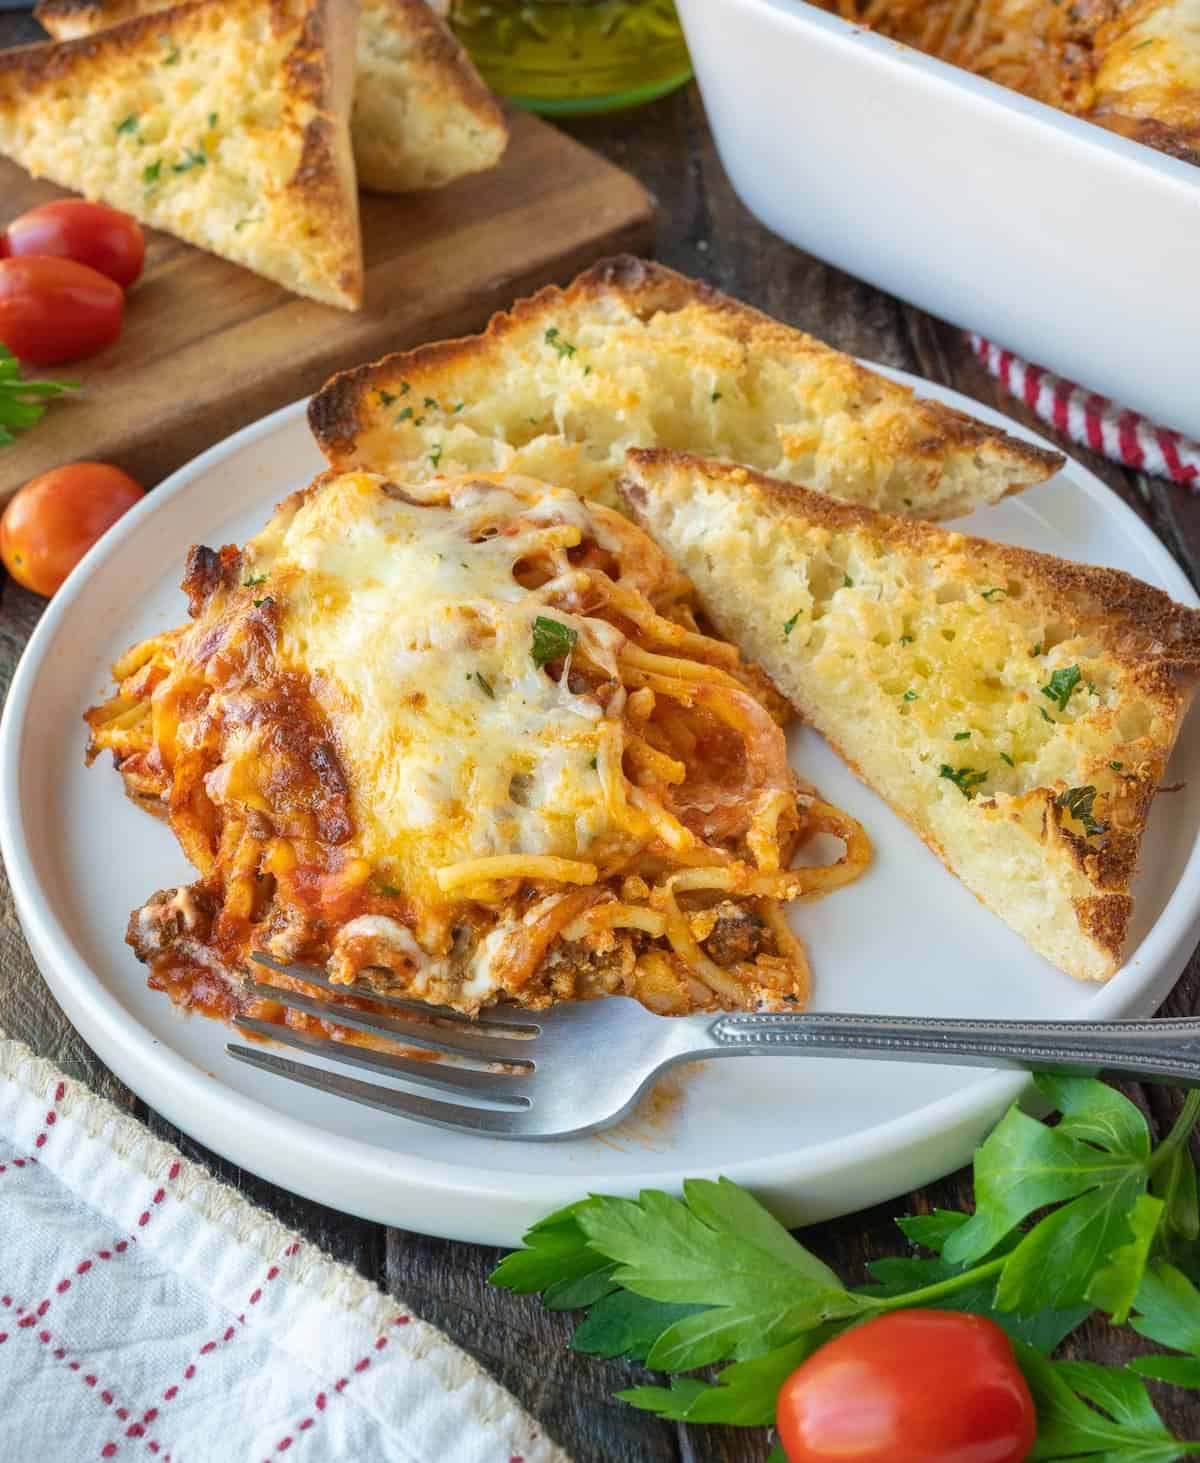 Baked spaghetti placed on a plate with garlic bread.